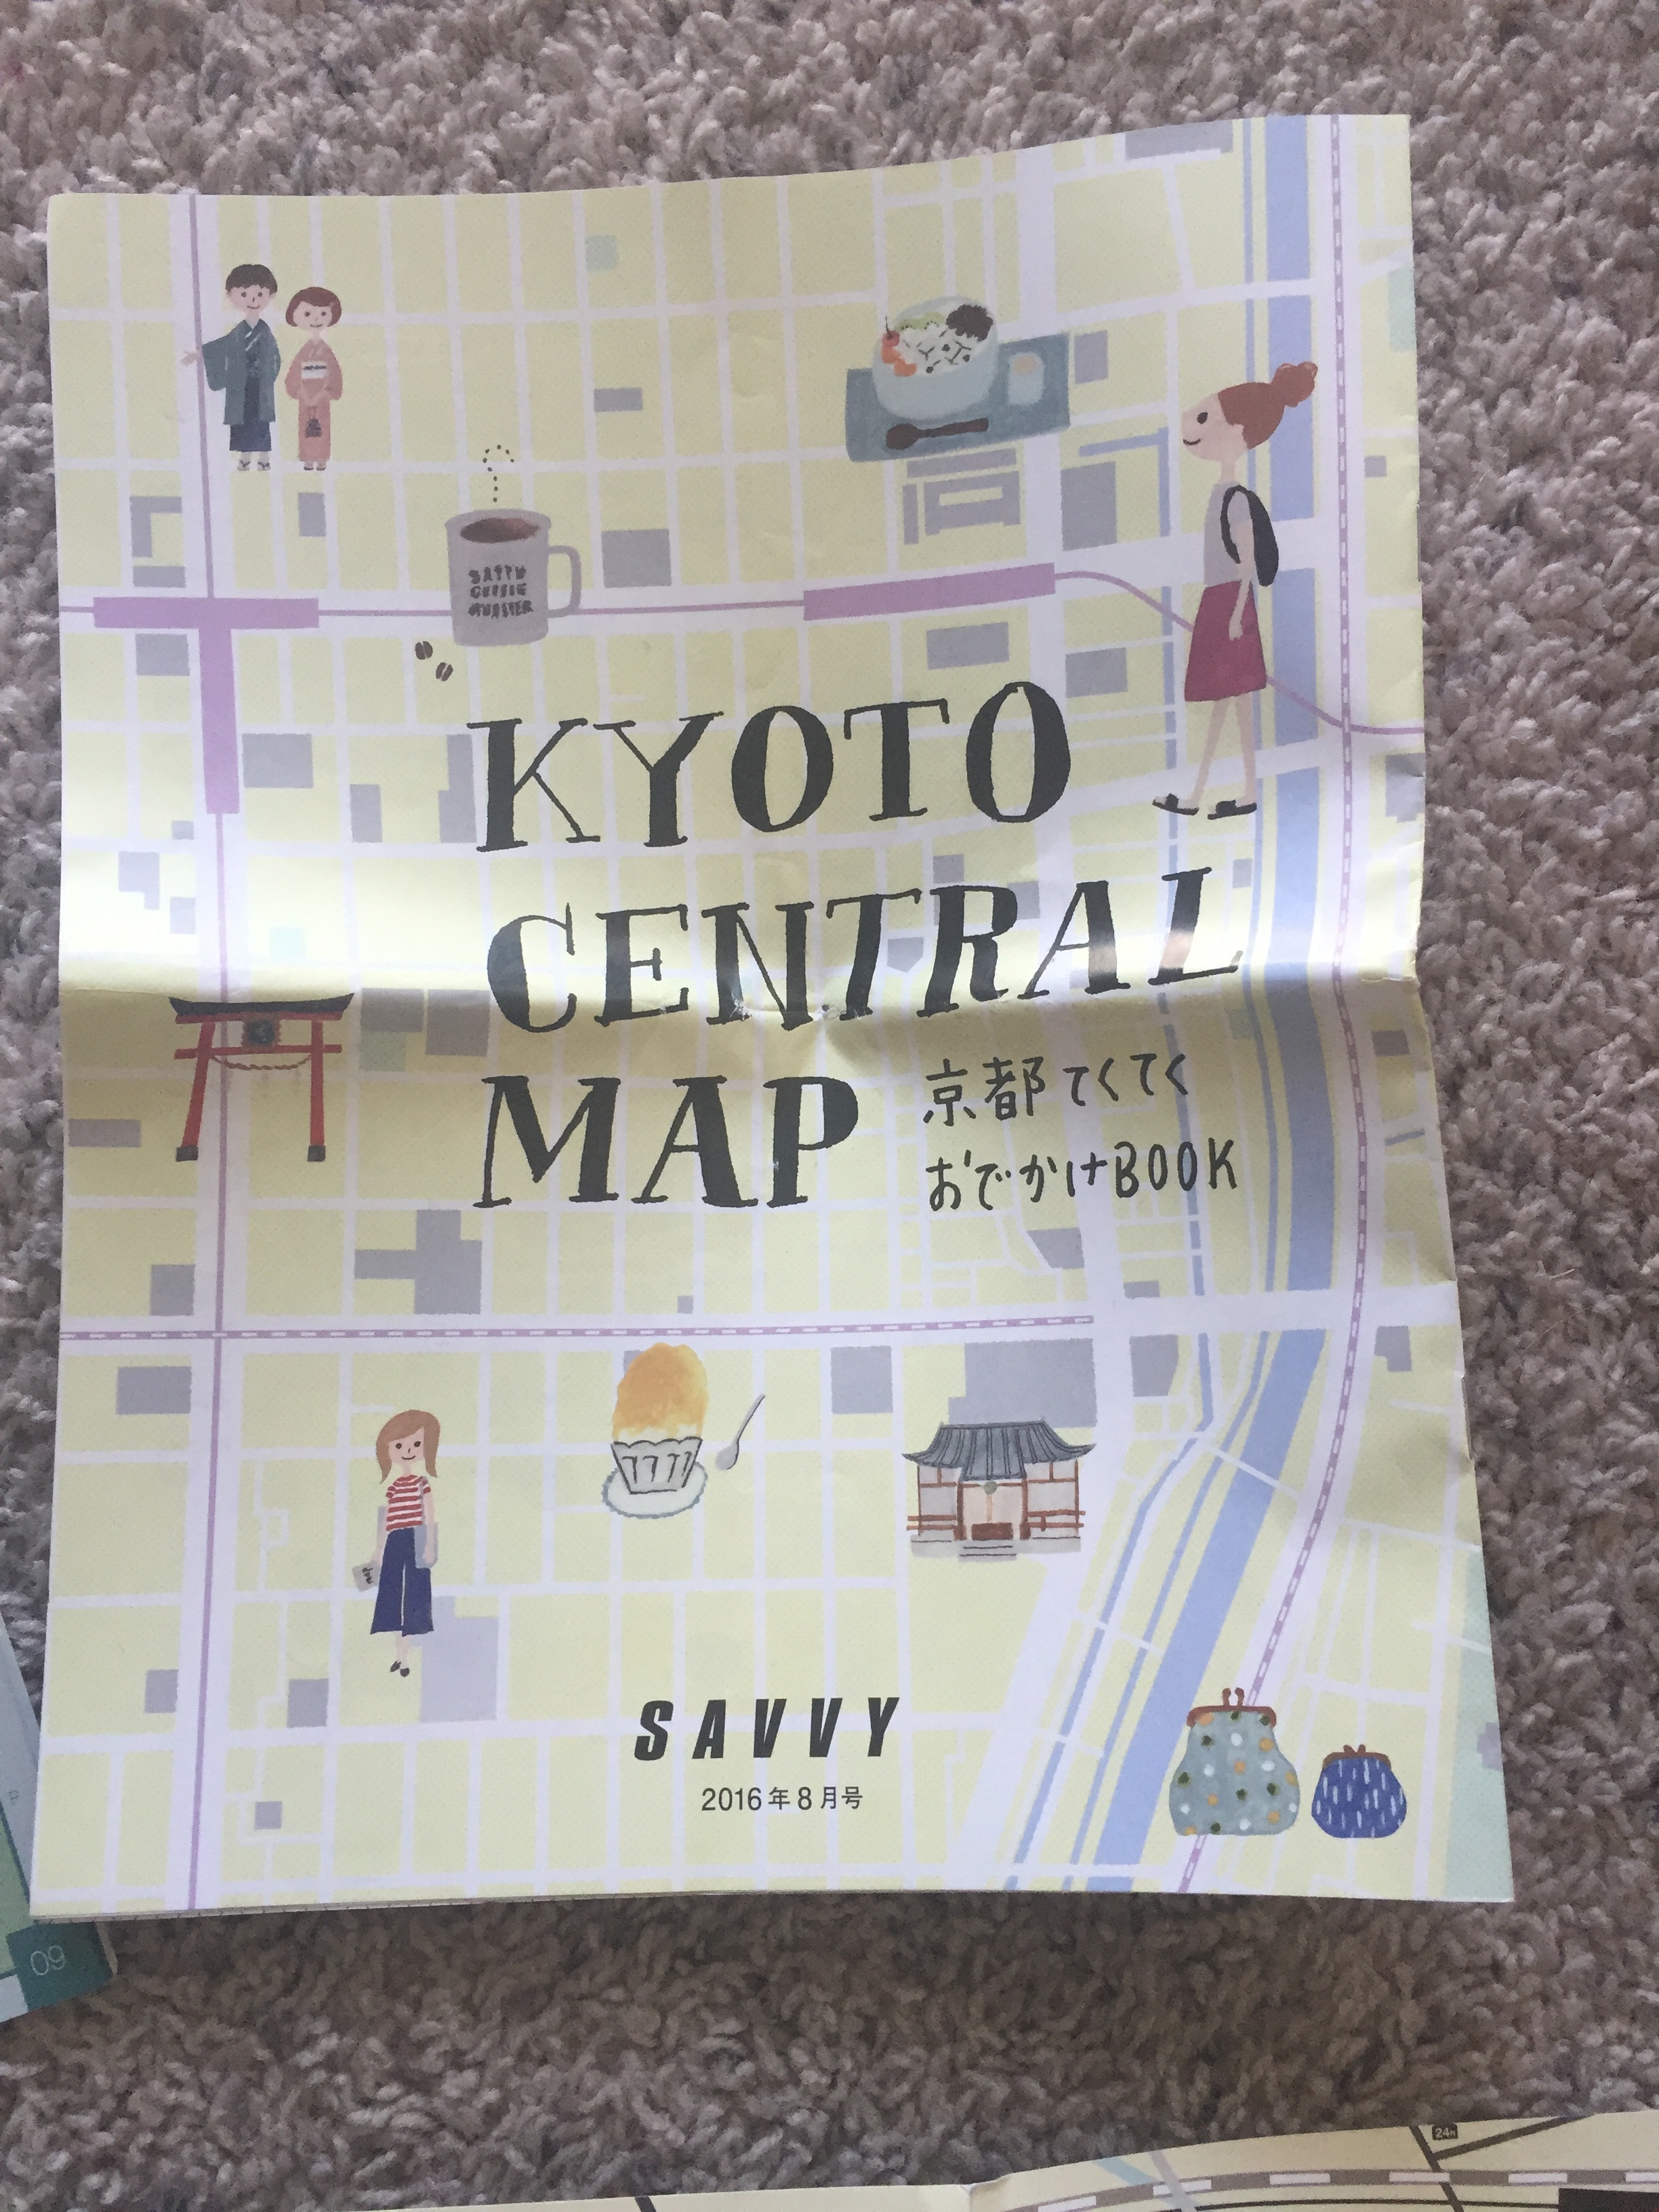 Kyoto Central Map